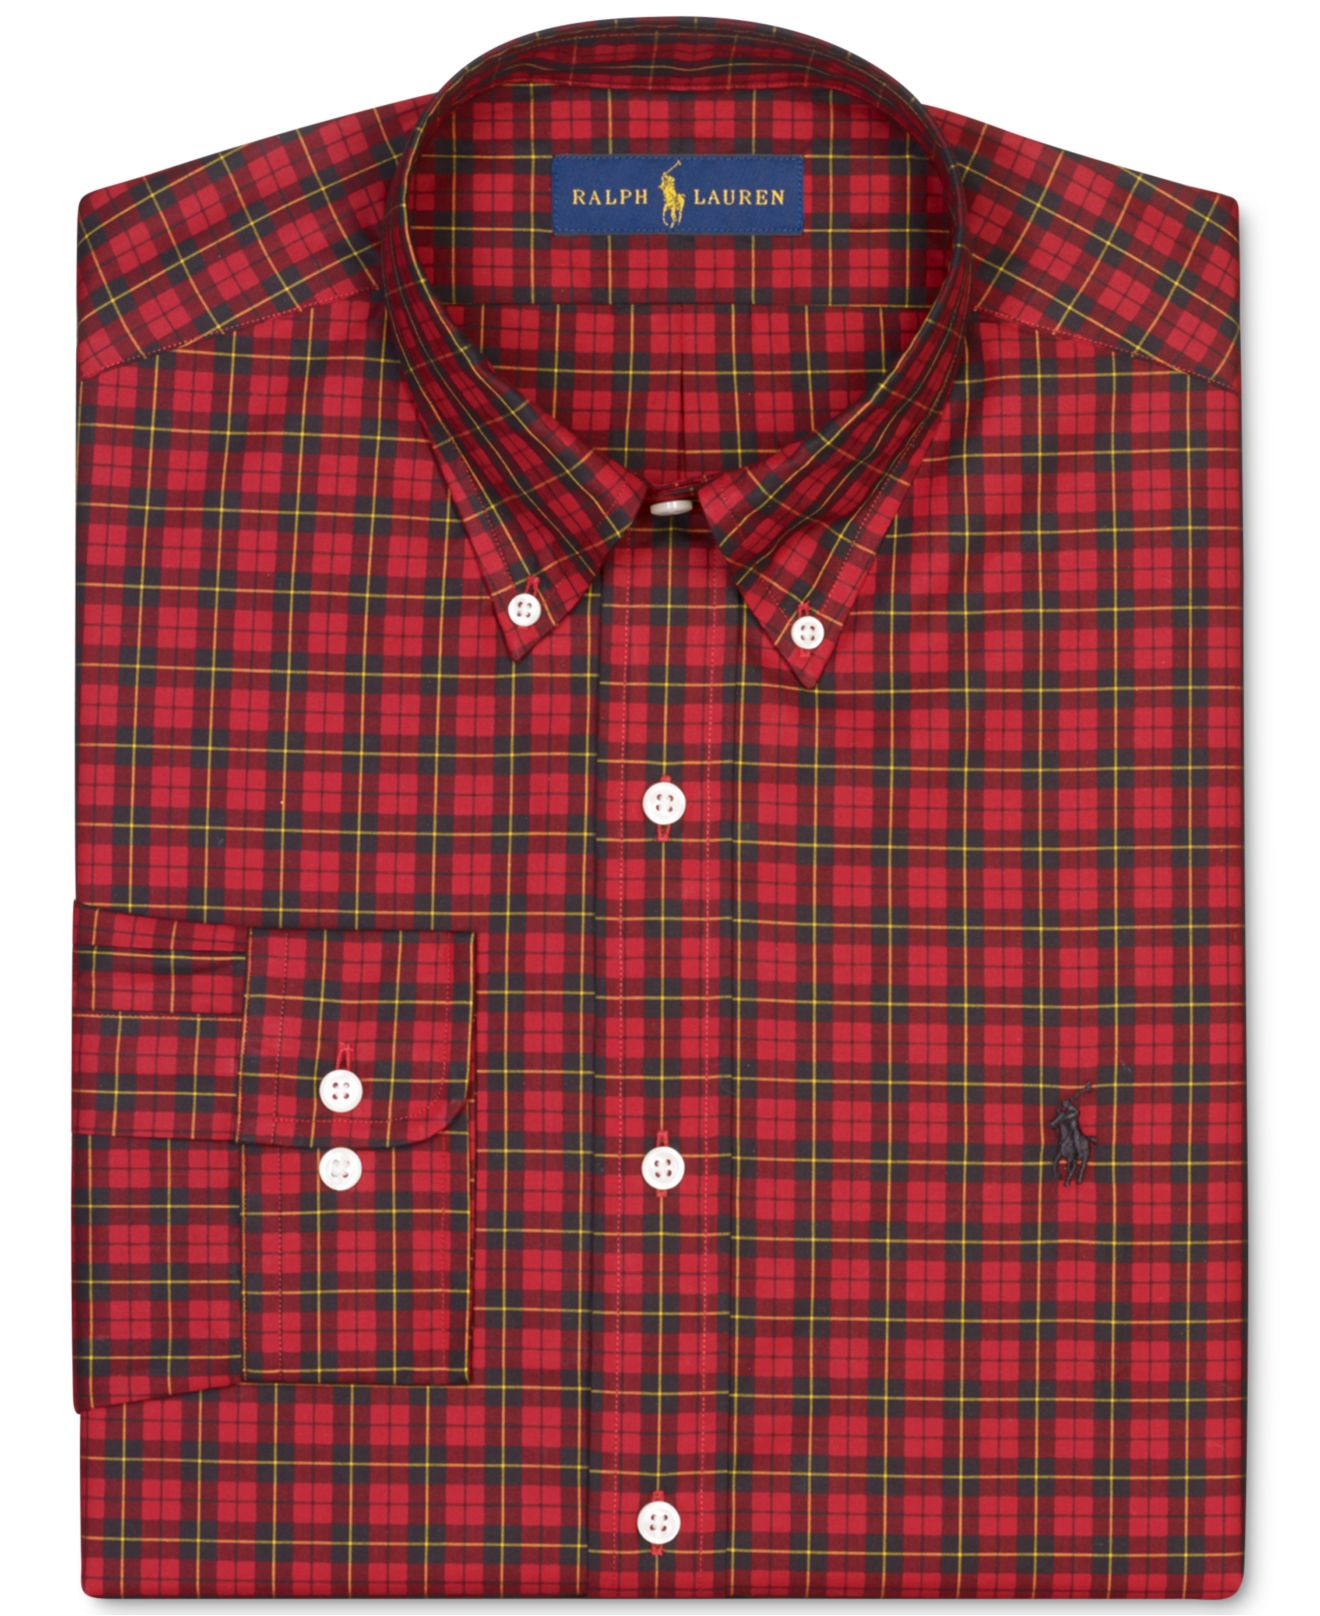 Lyst - Polo Ralph Lauren Red Plaid Dress Shirt in Red for Men